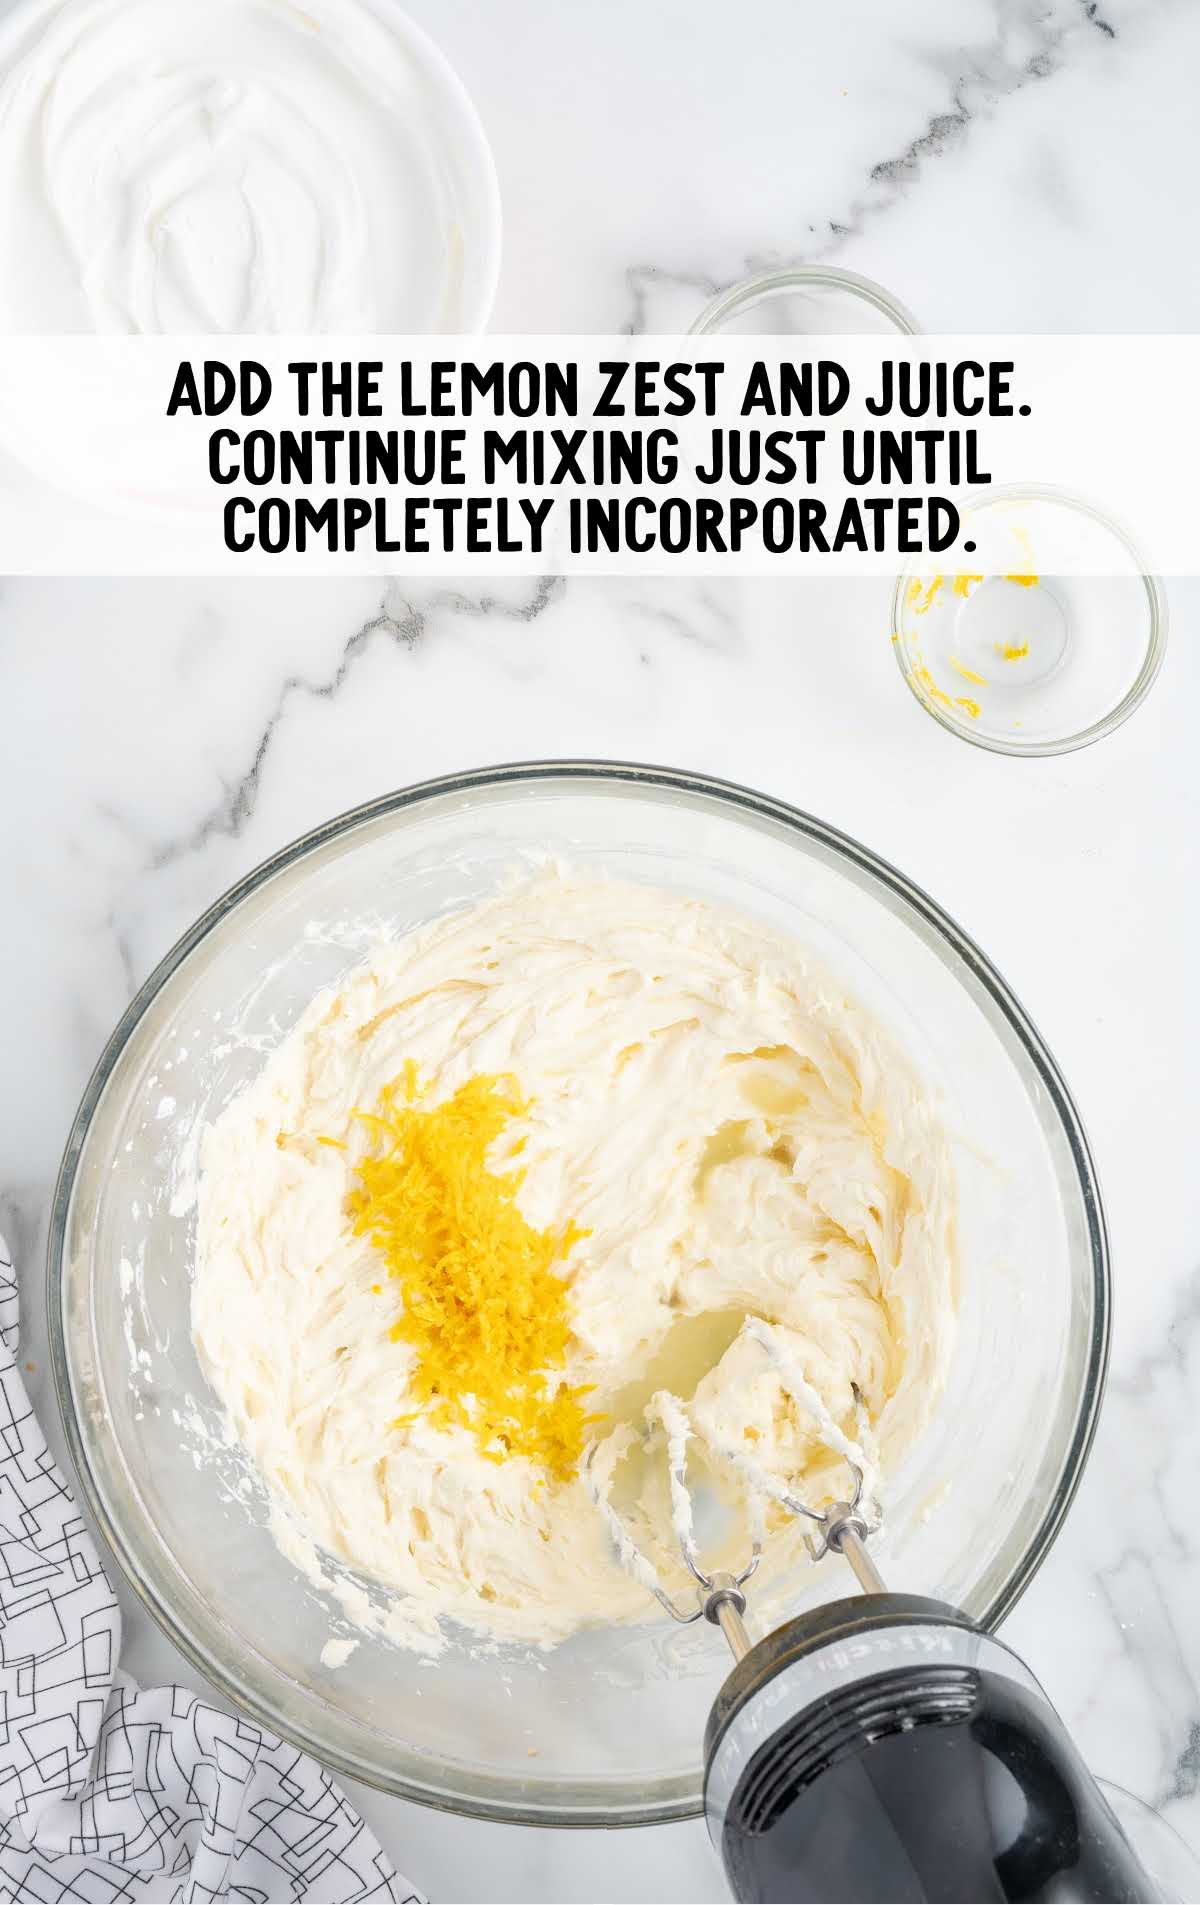 lemon zest and juice added to the butter mixture